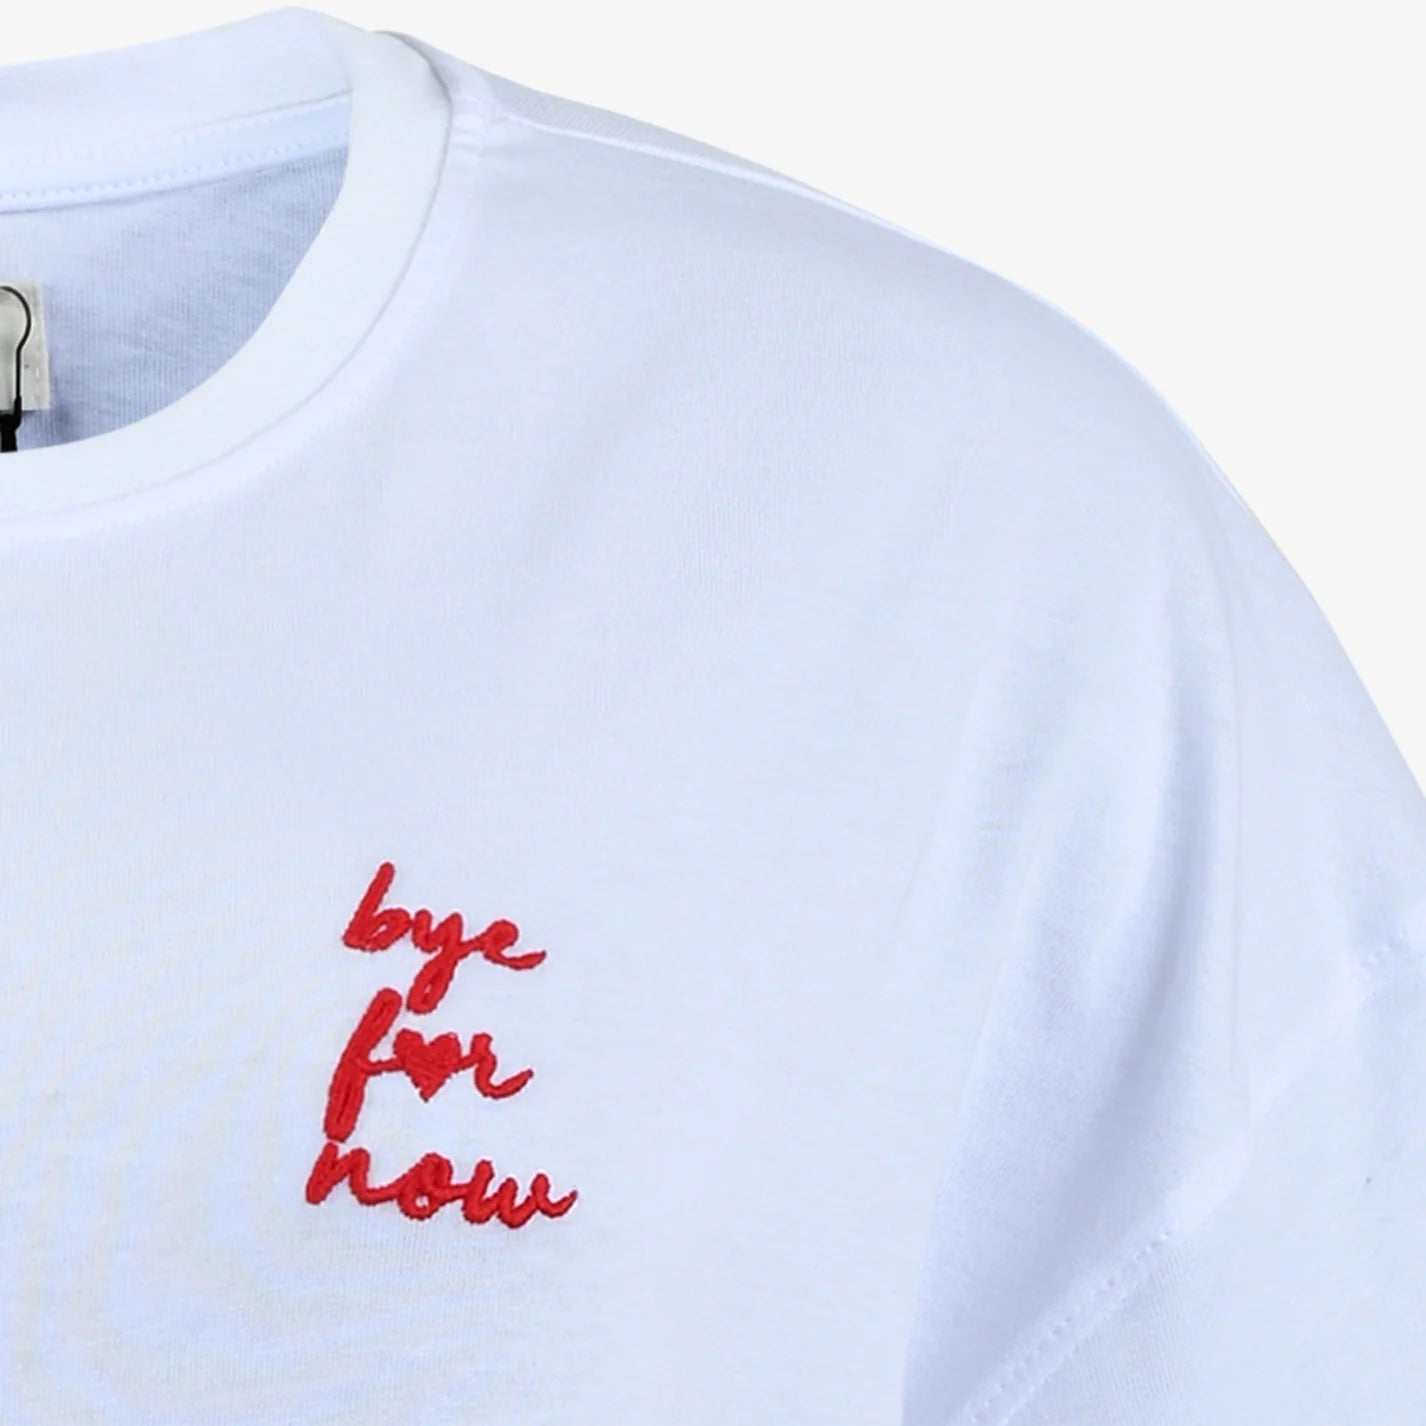 T-shirt with Red text